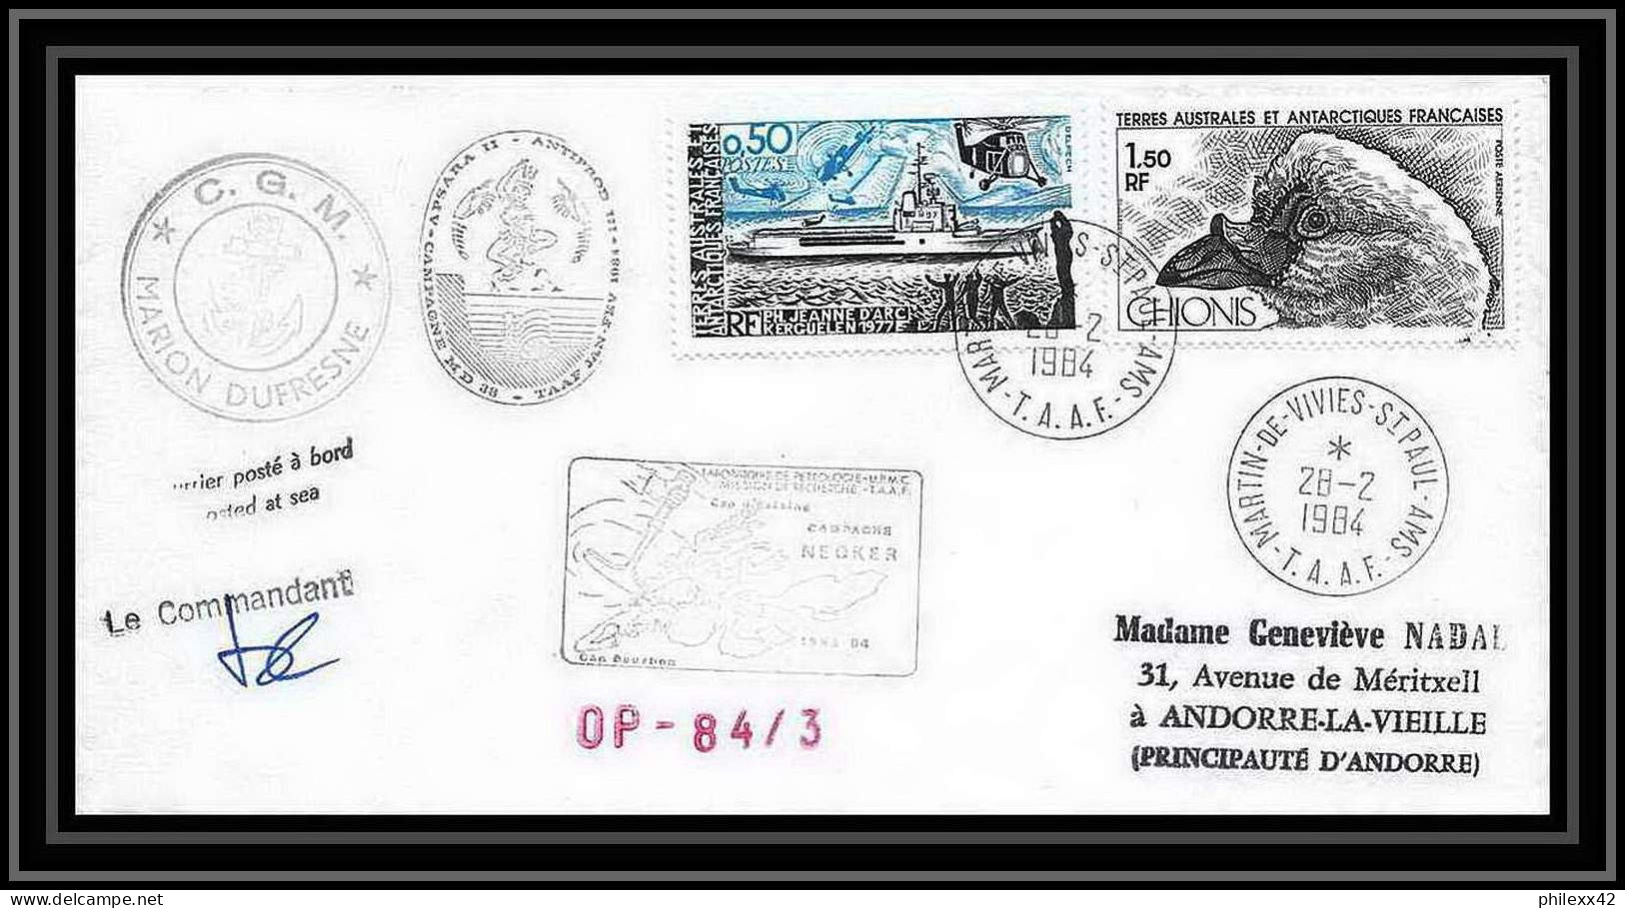 1225 Campagne Neoker 28/2/1984 Marion Dufresne TAAF Antarctic Terres Australes Lettre (cover) Signé Signed - Covers & Documents